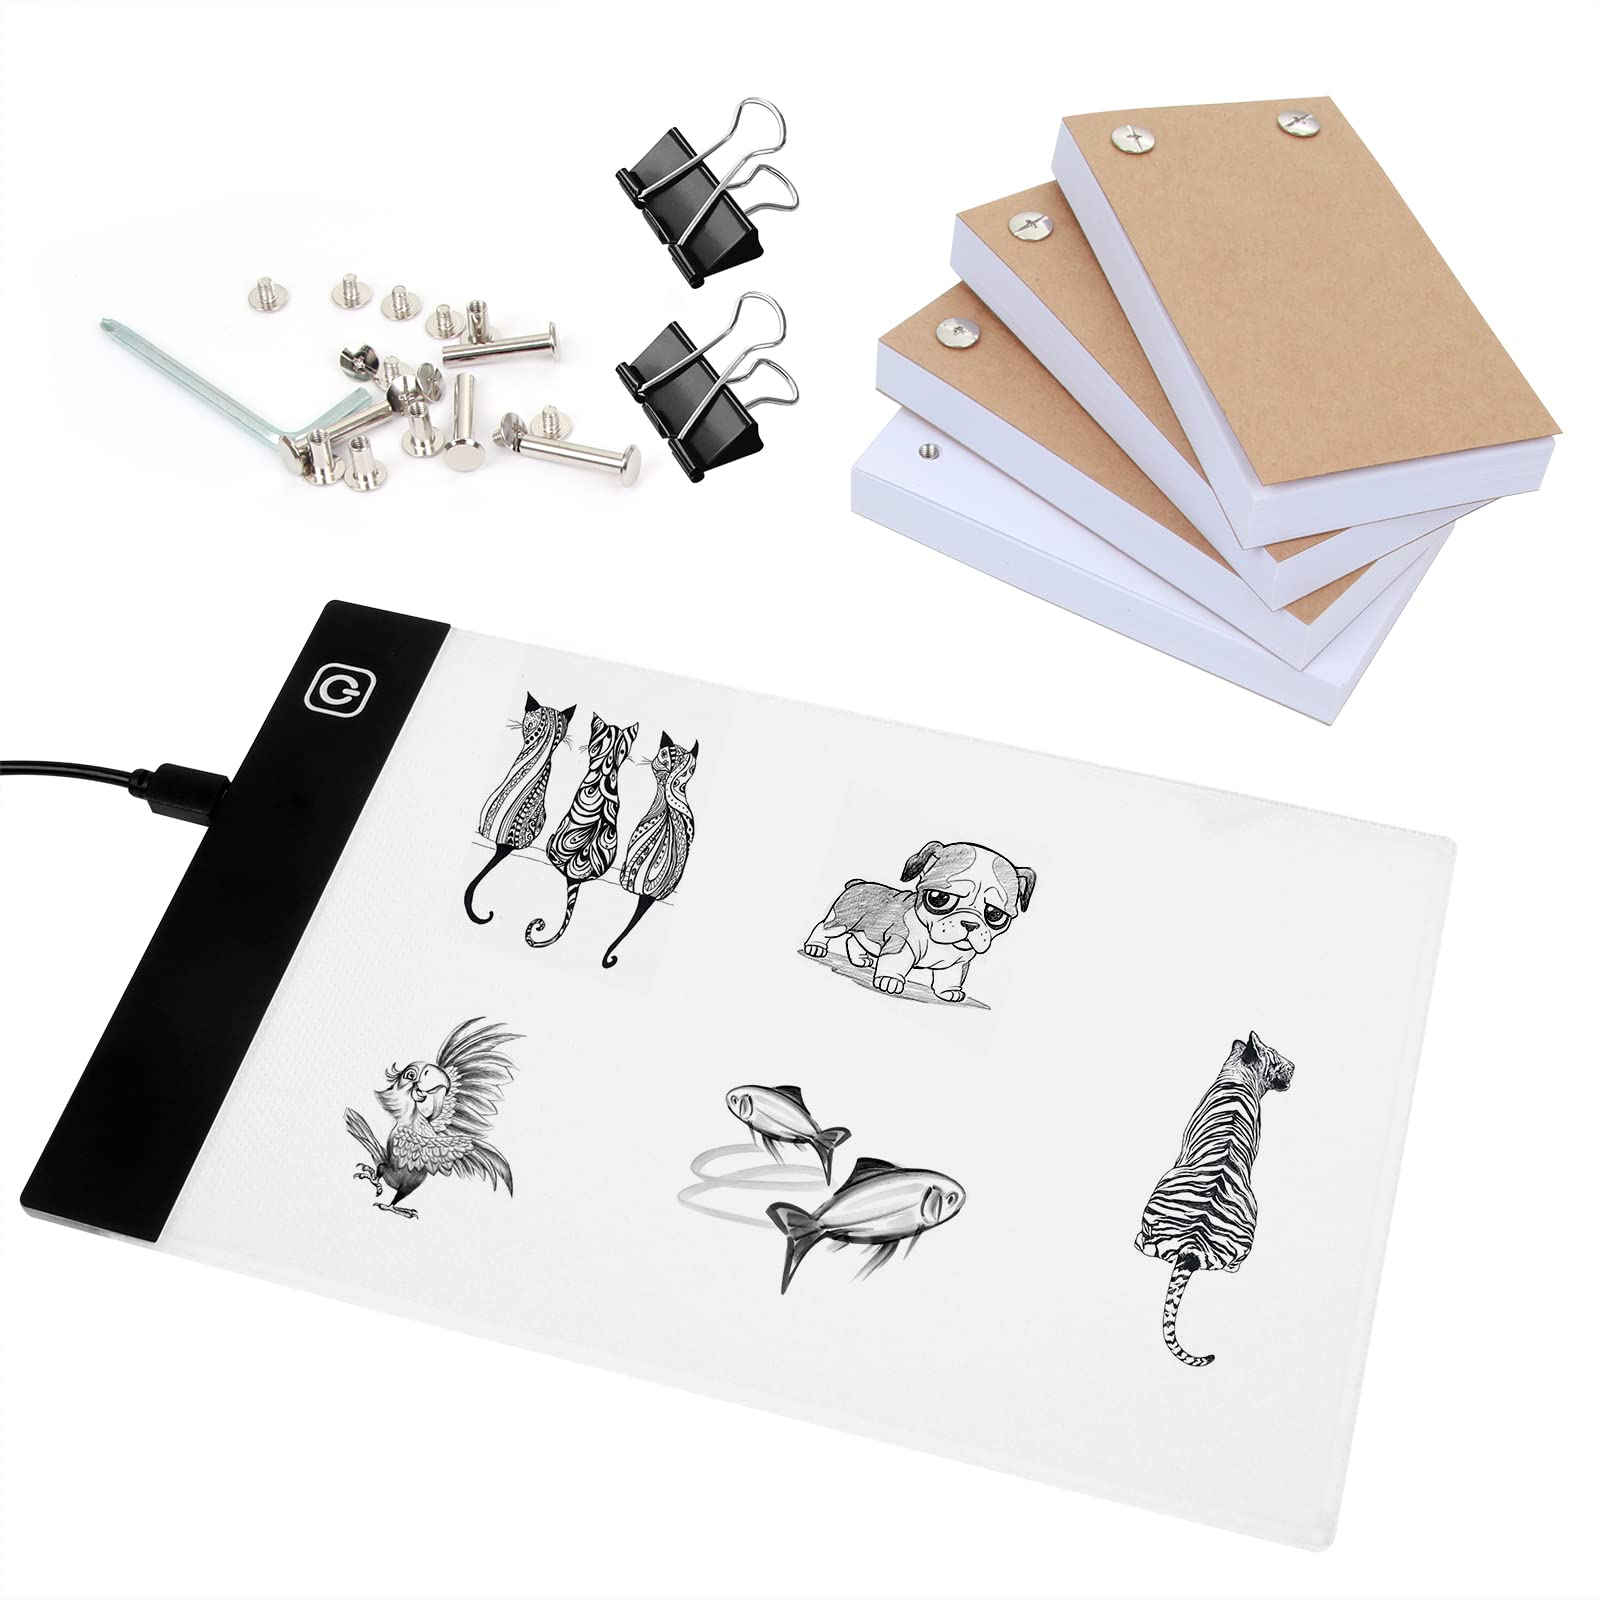 Flip Book Kit with Light Pad - A5 LED Light Board/Box & 320 Sheets Flipbook  for Drawing, Tracing